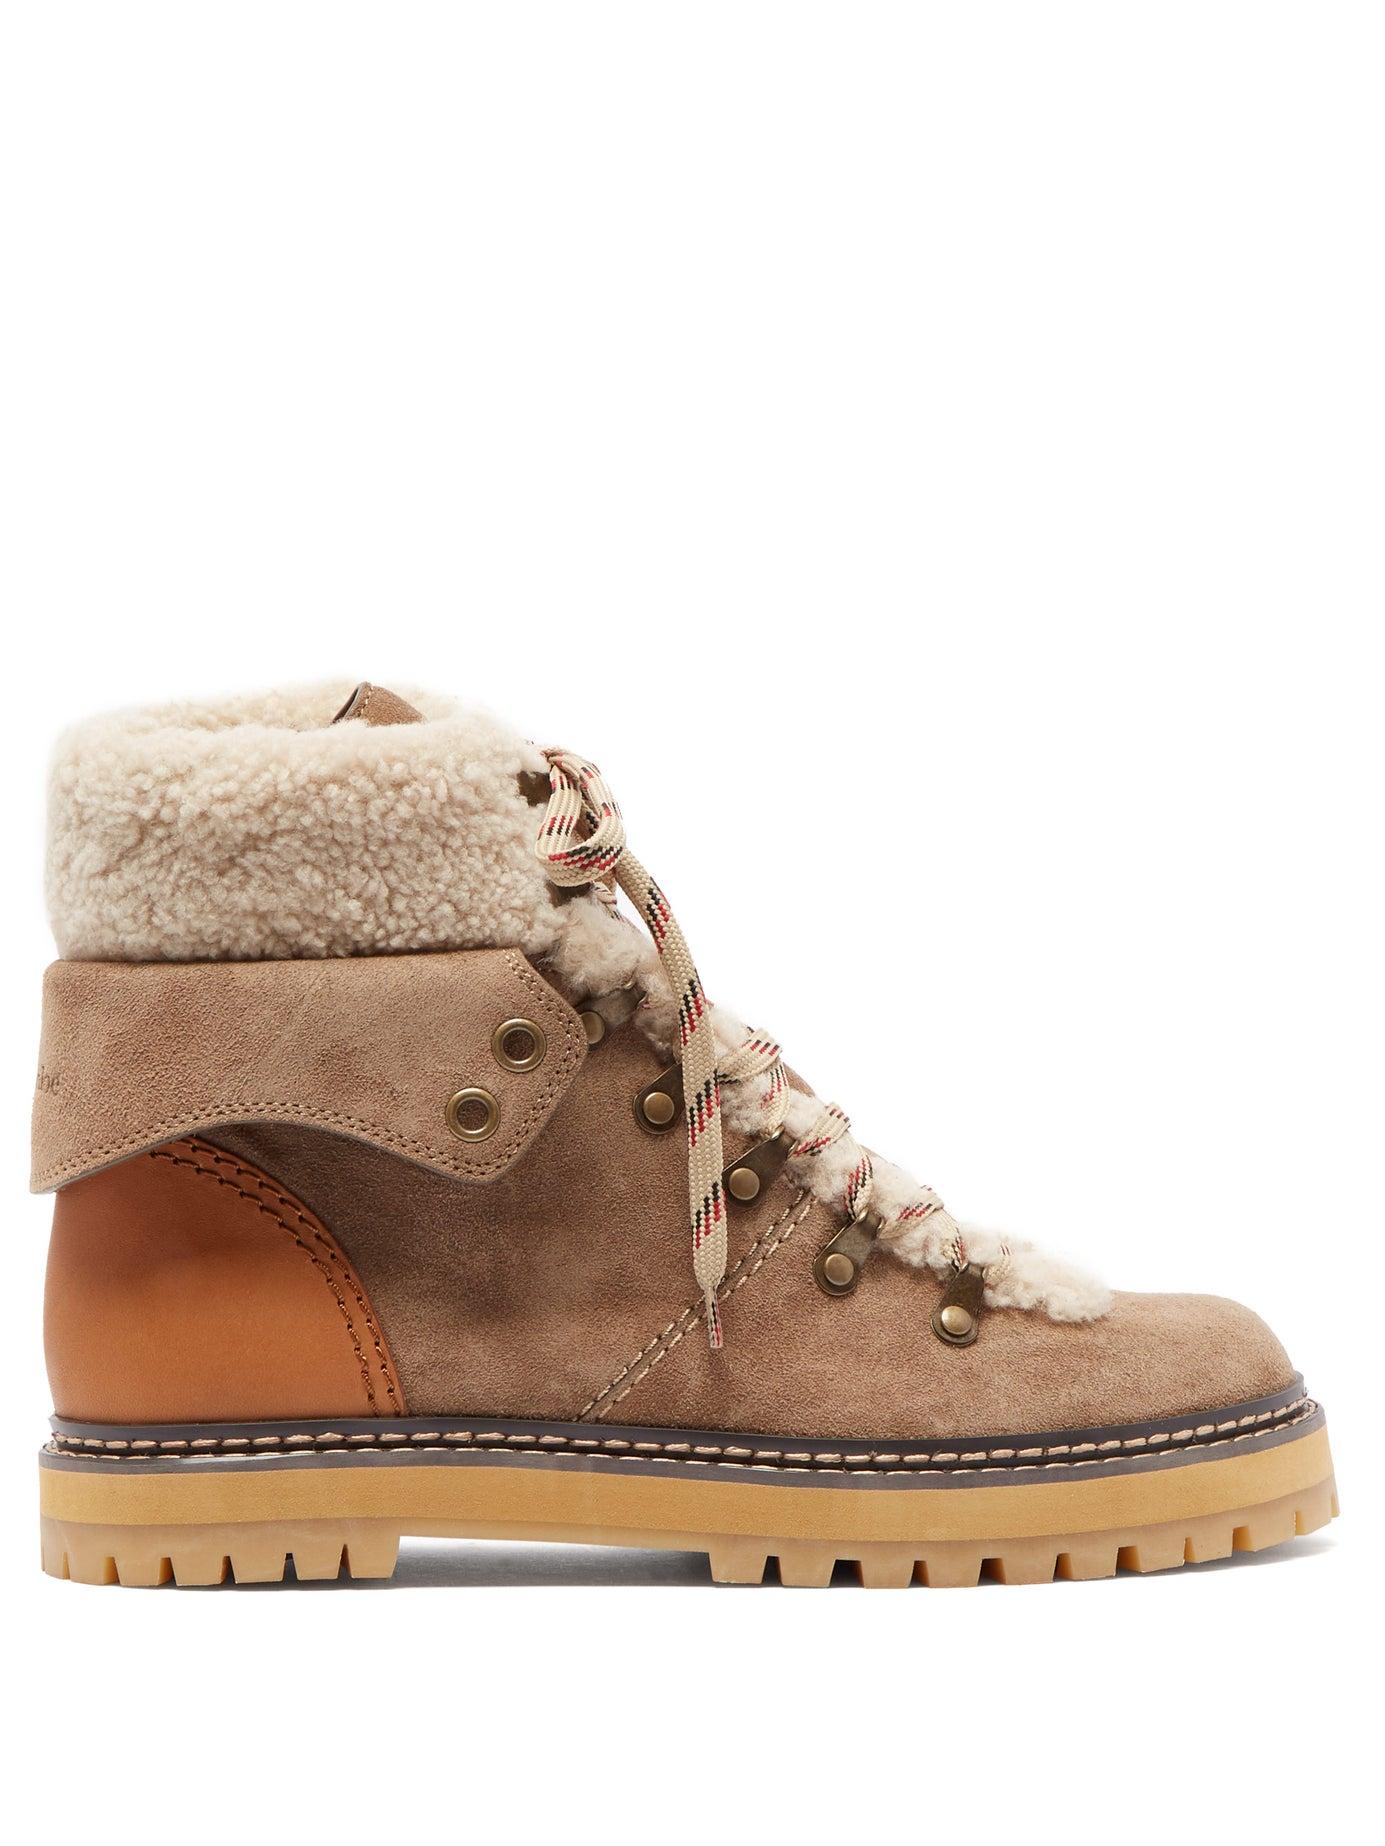 See By Chloé Shearling-lined Suede Hiking Boots in Beige White (Natural ...